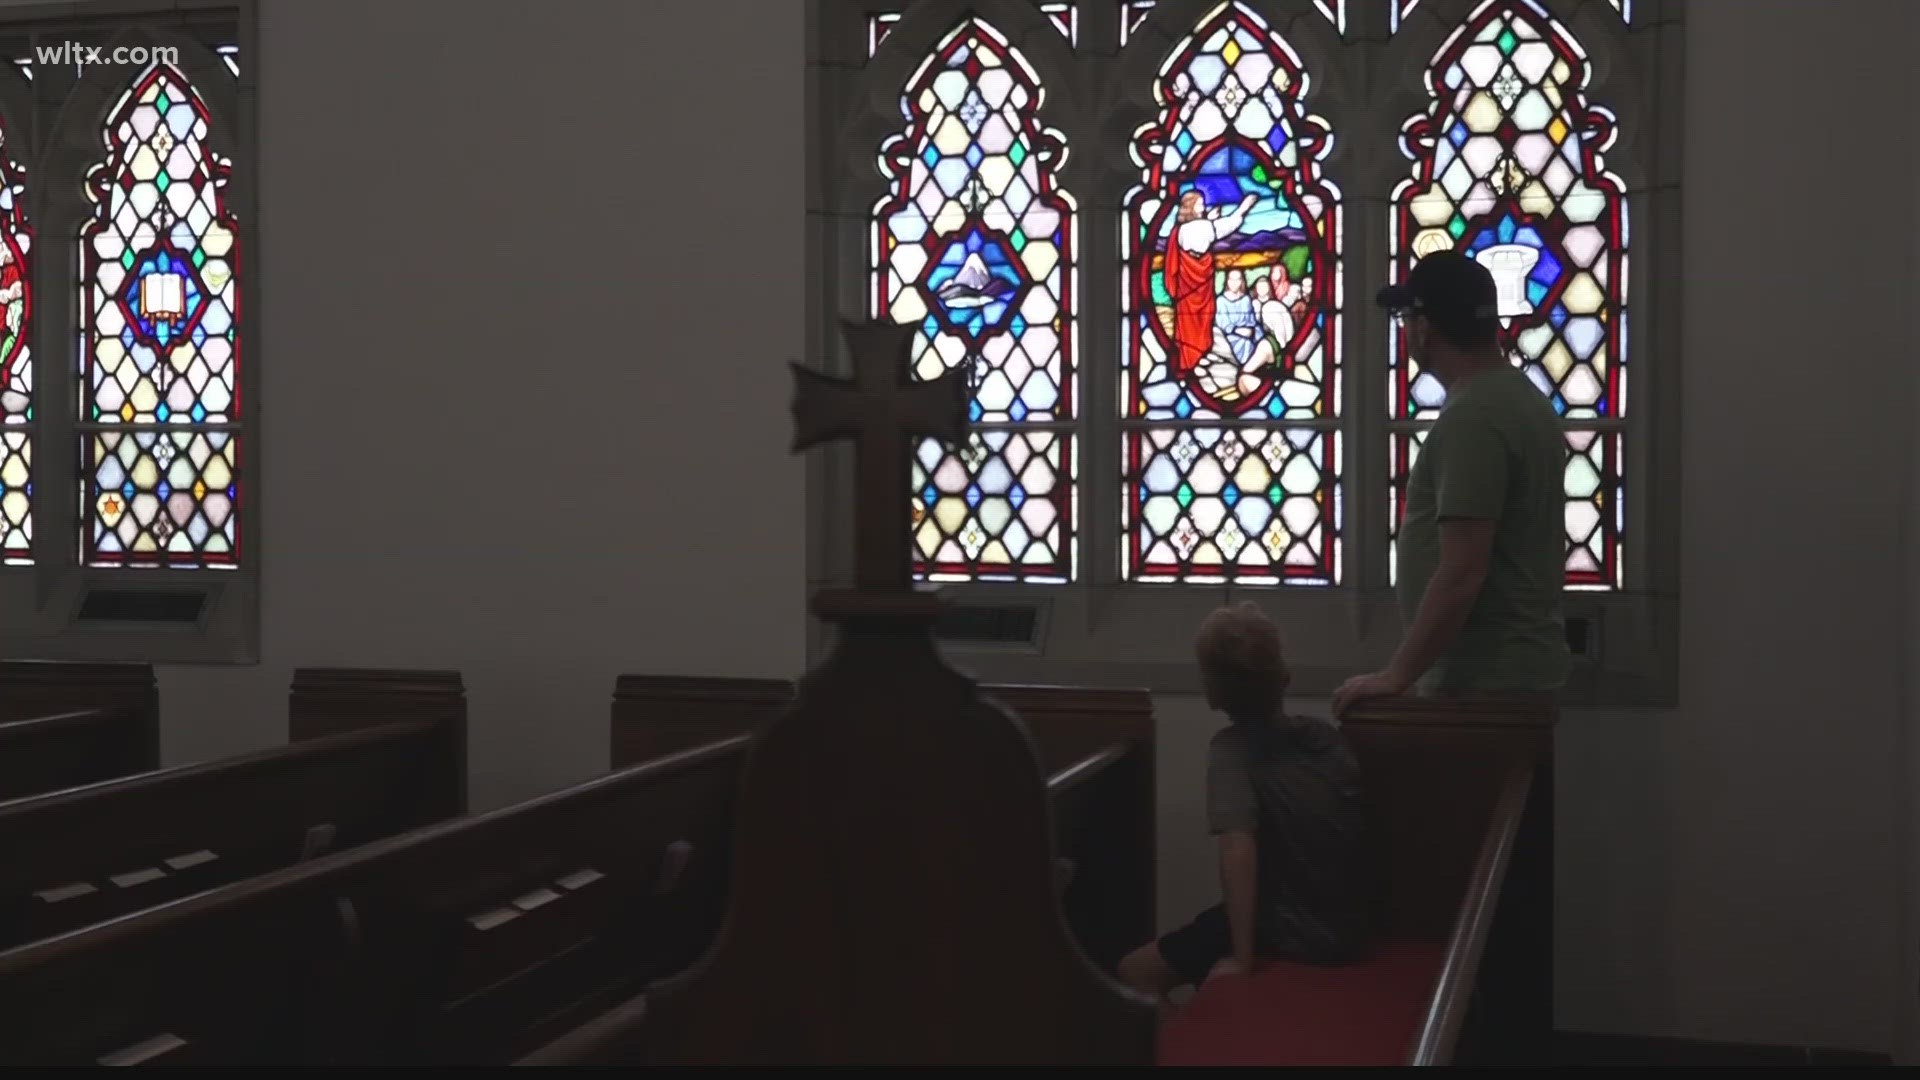 An aging church in northeast Columbia is opening this weekend to show off its history and recruit new members.